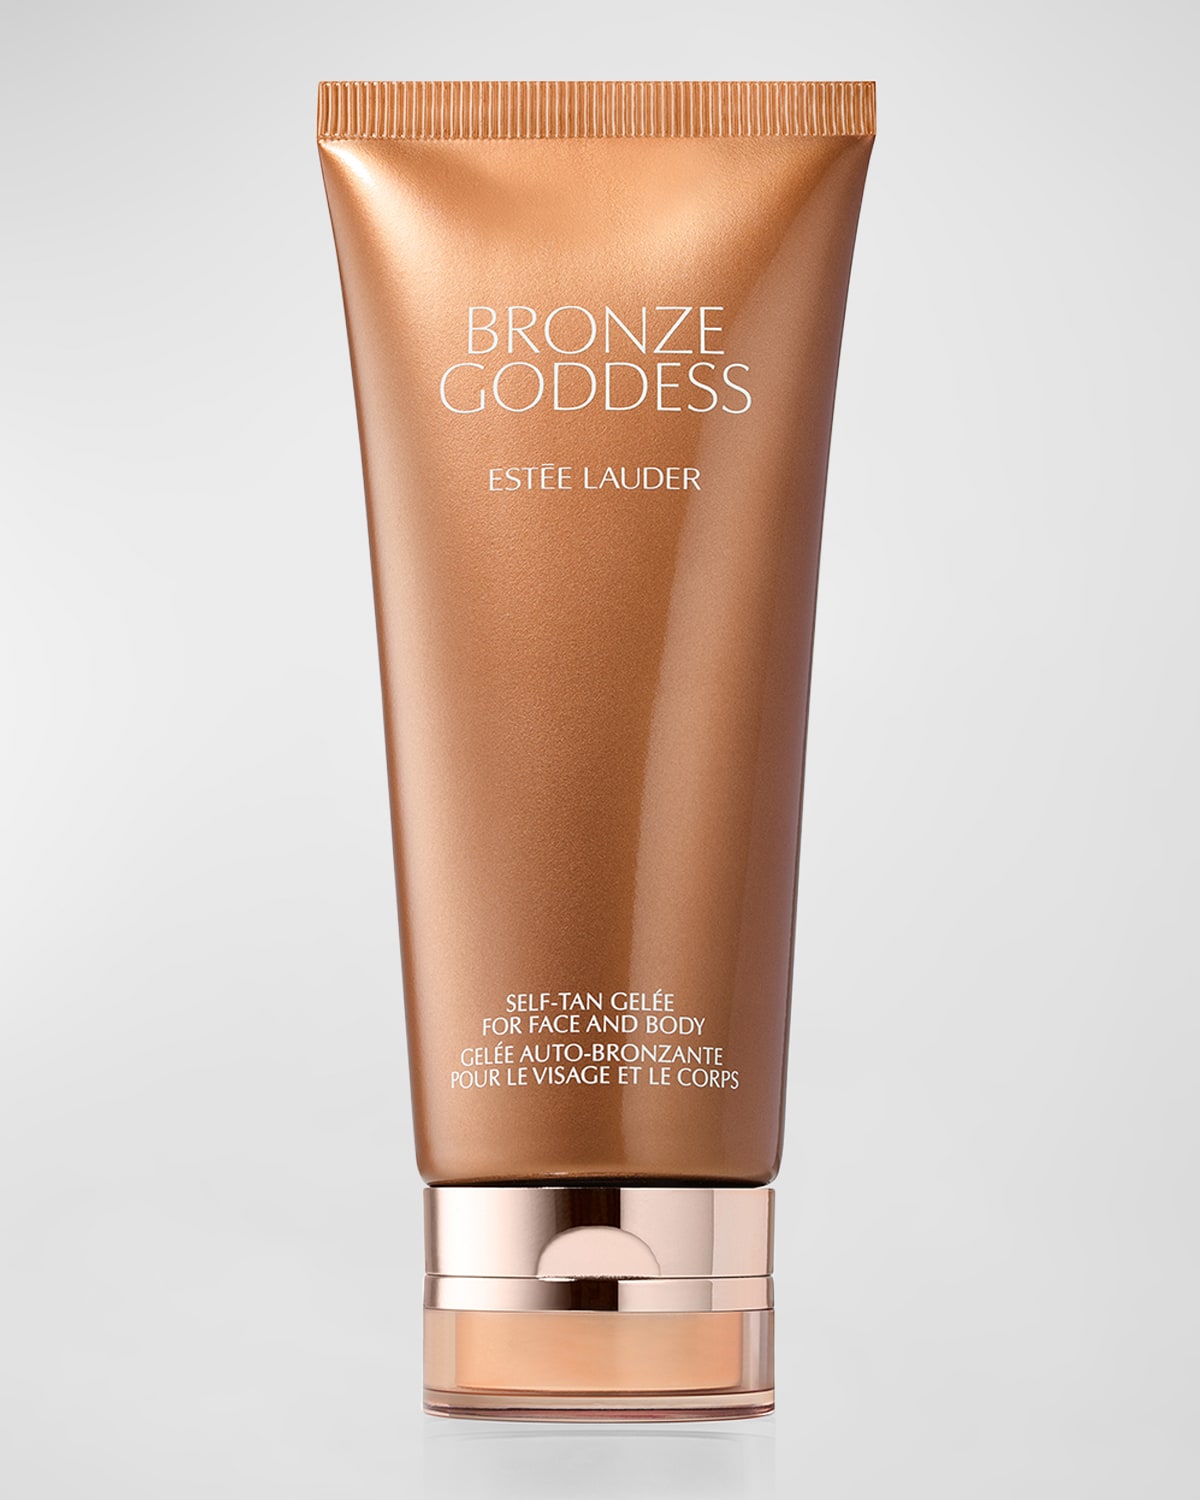 Bronze Goddess Self-Tan Gelee for Face and Body, 6.4 oz.